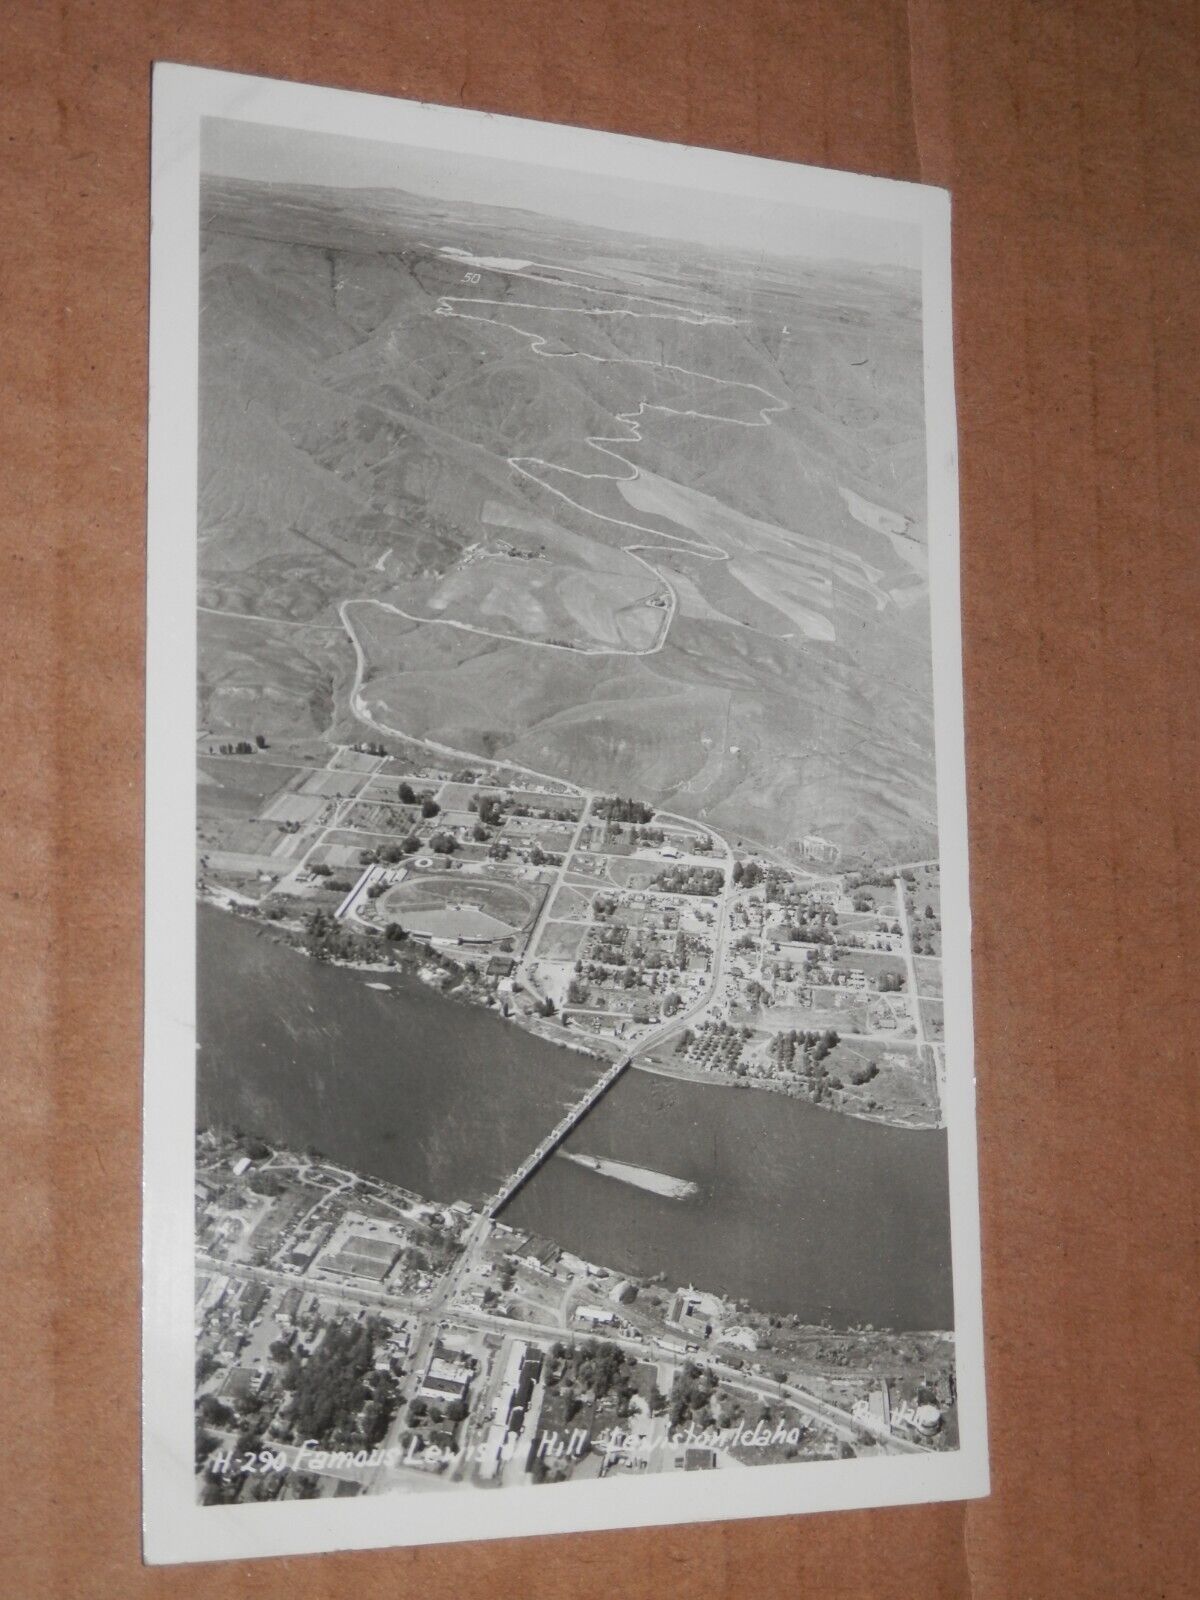 LEWISTON IDAHO - 1950\'s REAL-PHOTO POSTCARD - FAMOUS LEWIS HILL - AERIAL VIEW